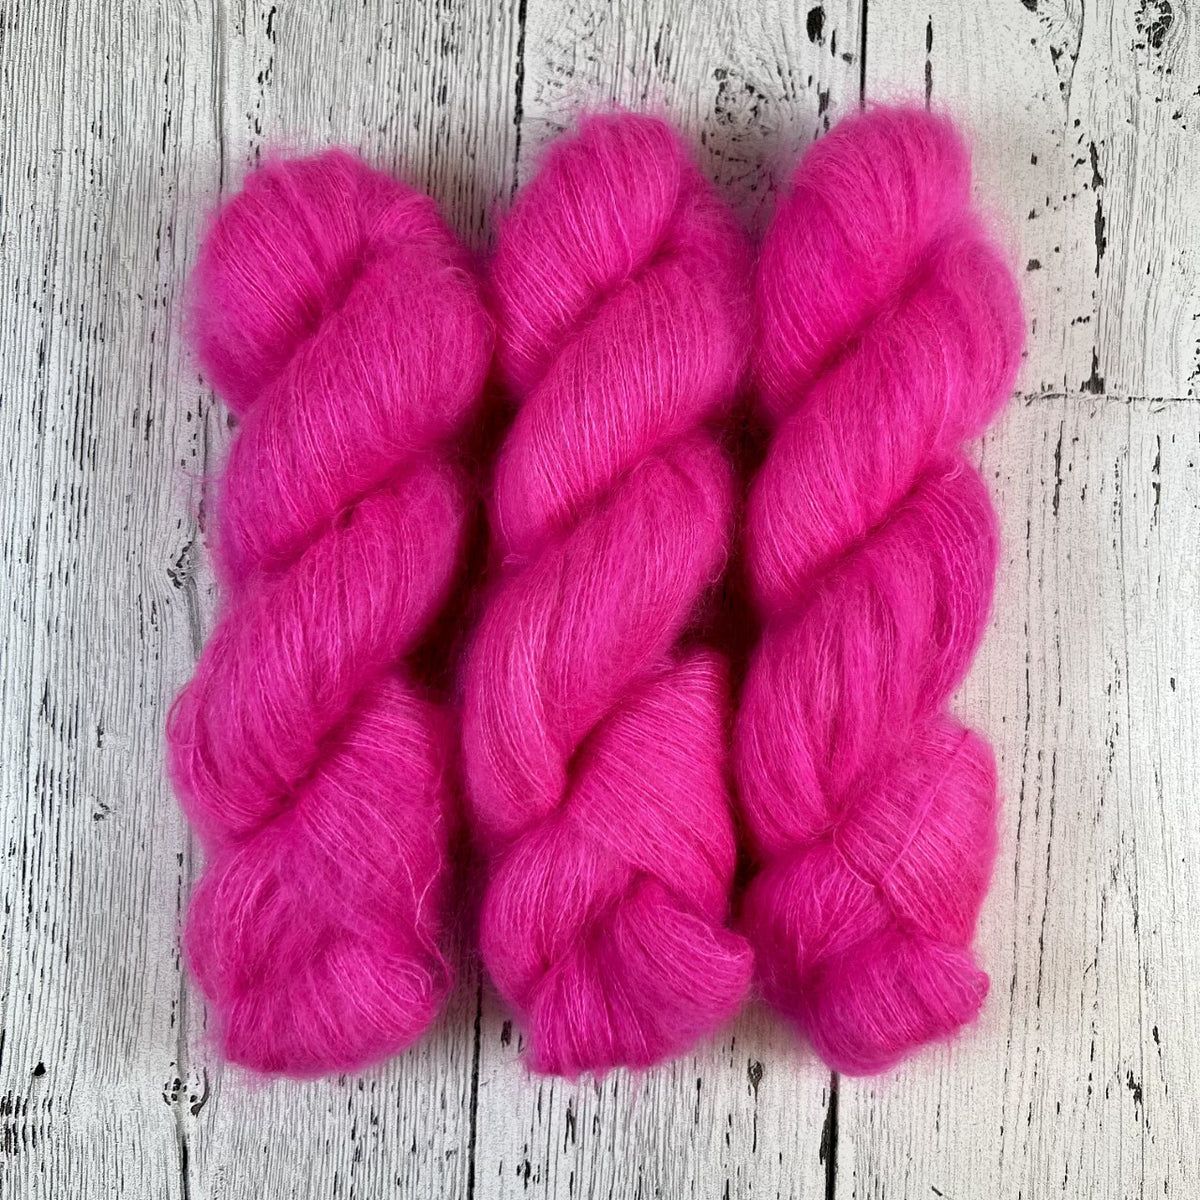 Pink Light Sabre - Delicacy Lace - Dyed Stock